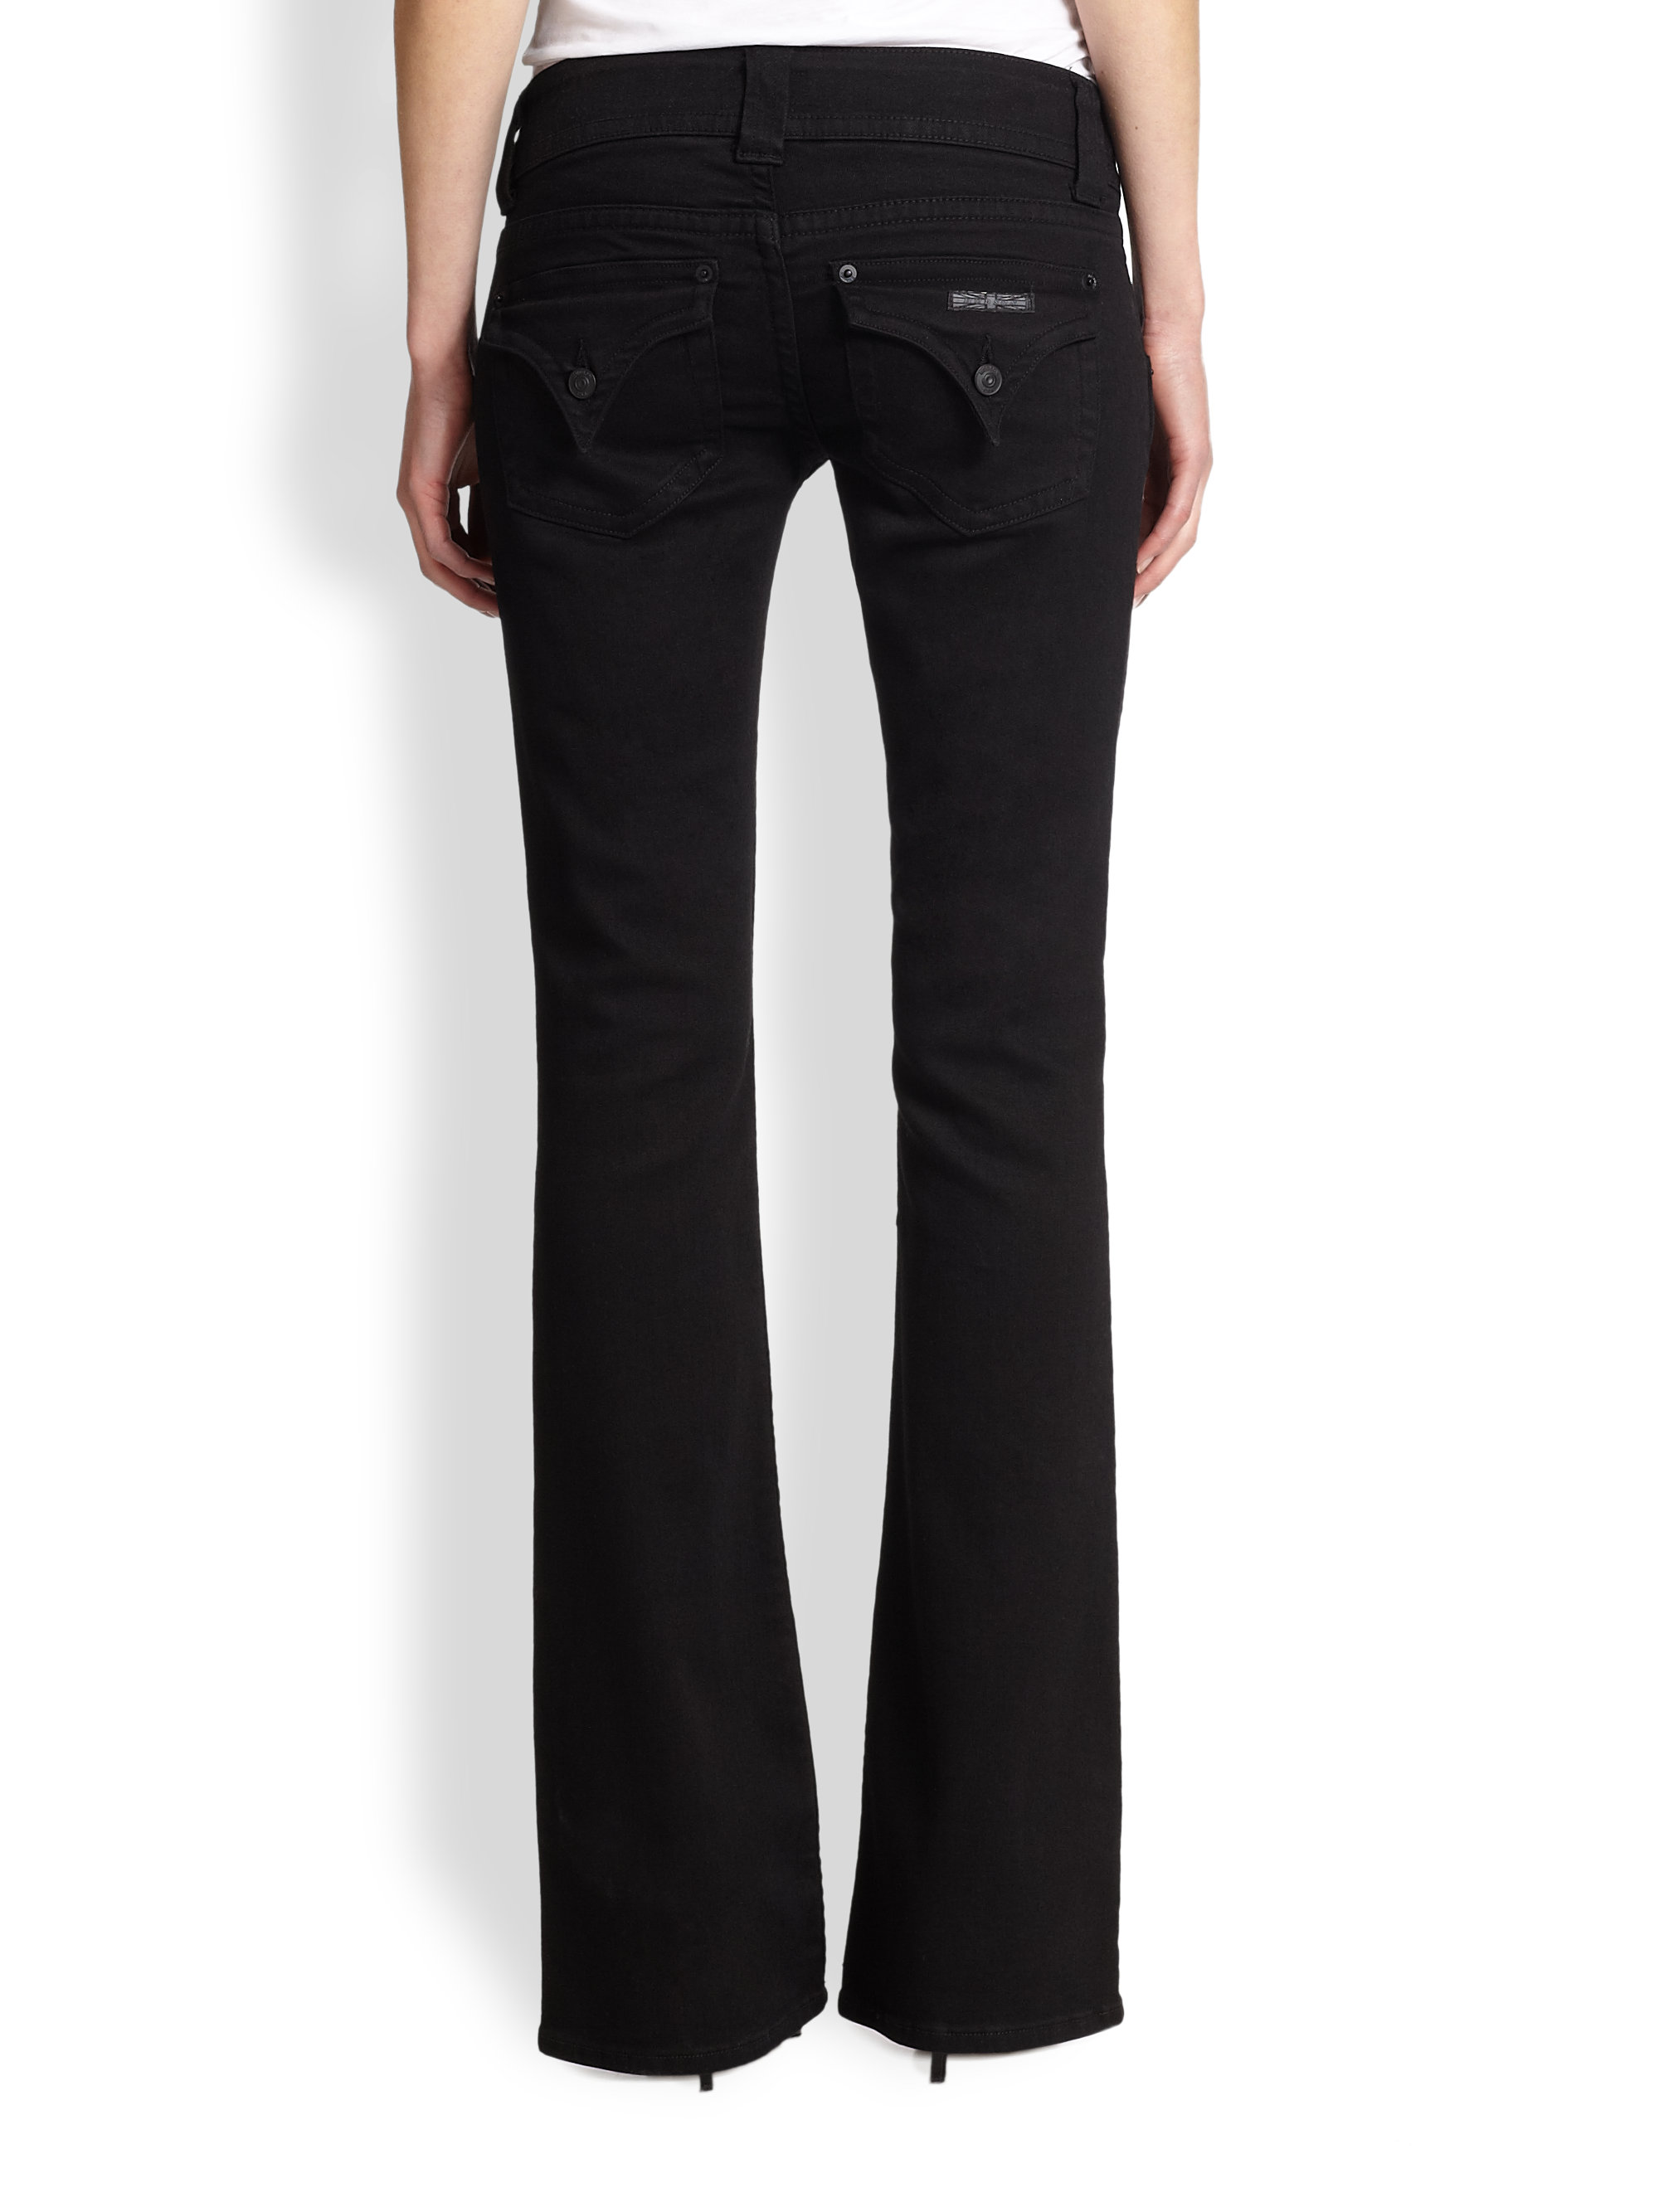 Hudson Jeans Signature Bootcut Jeans in Black - Lyst